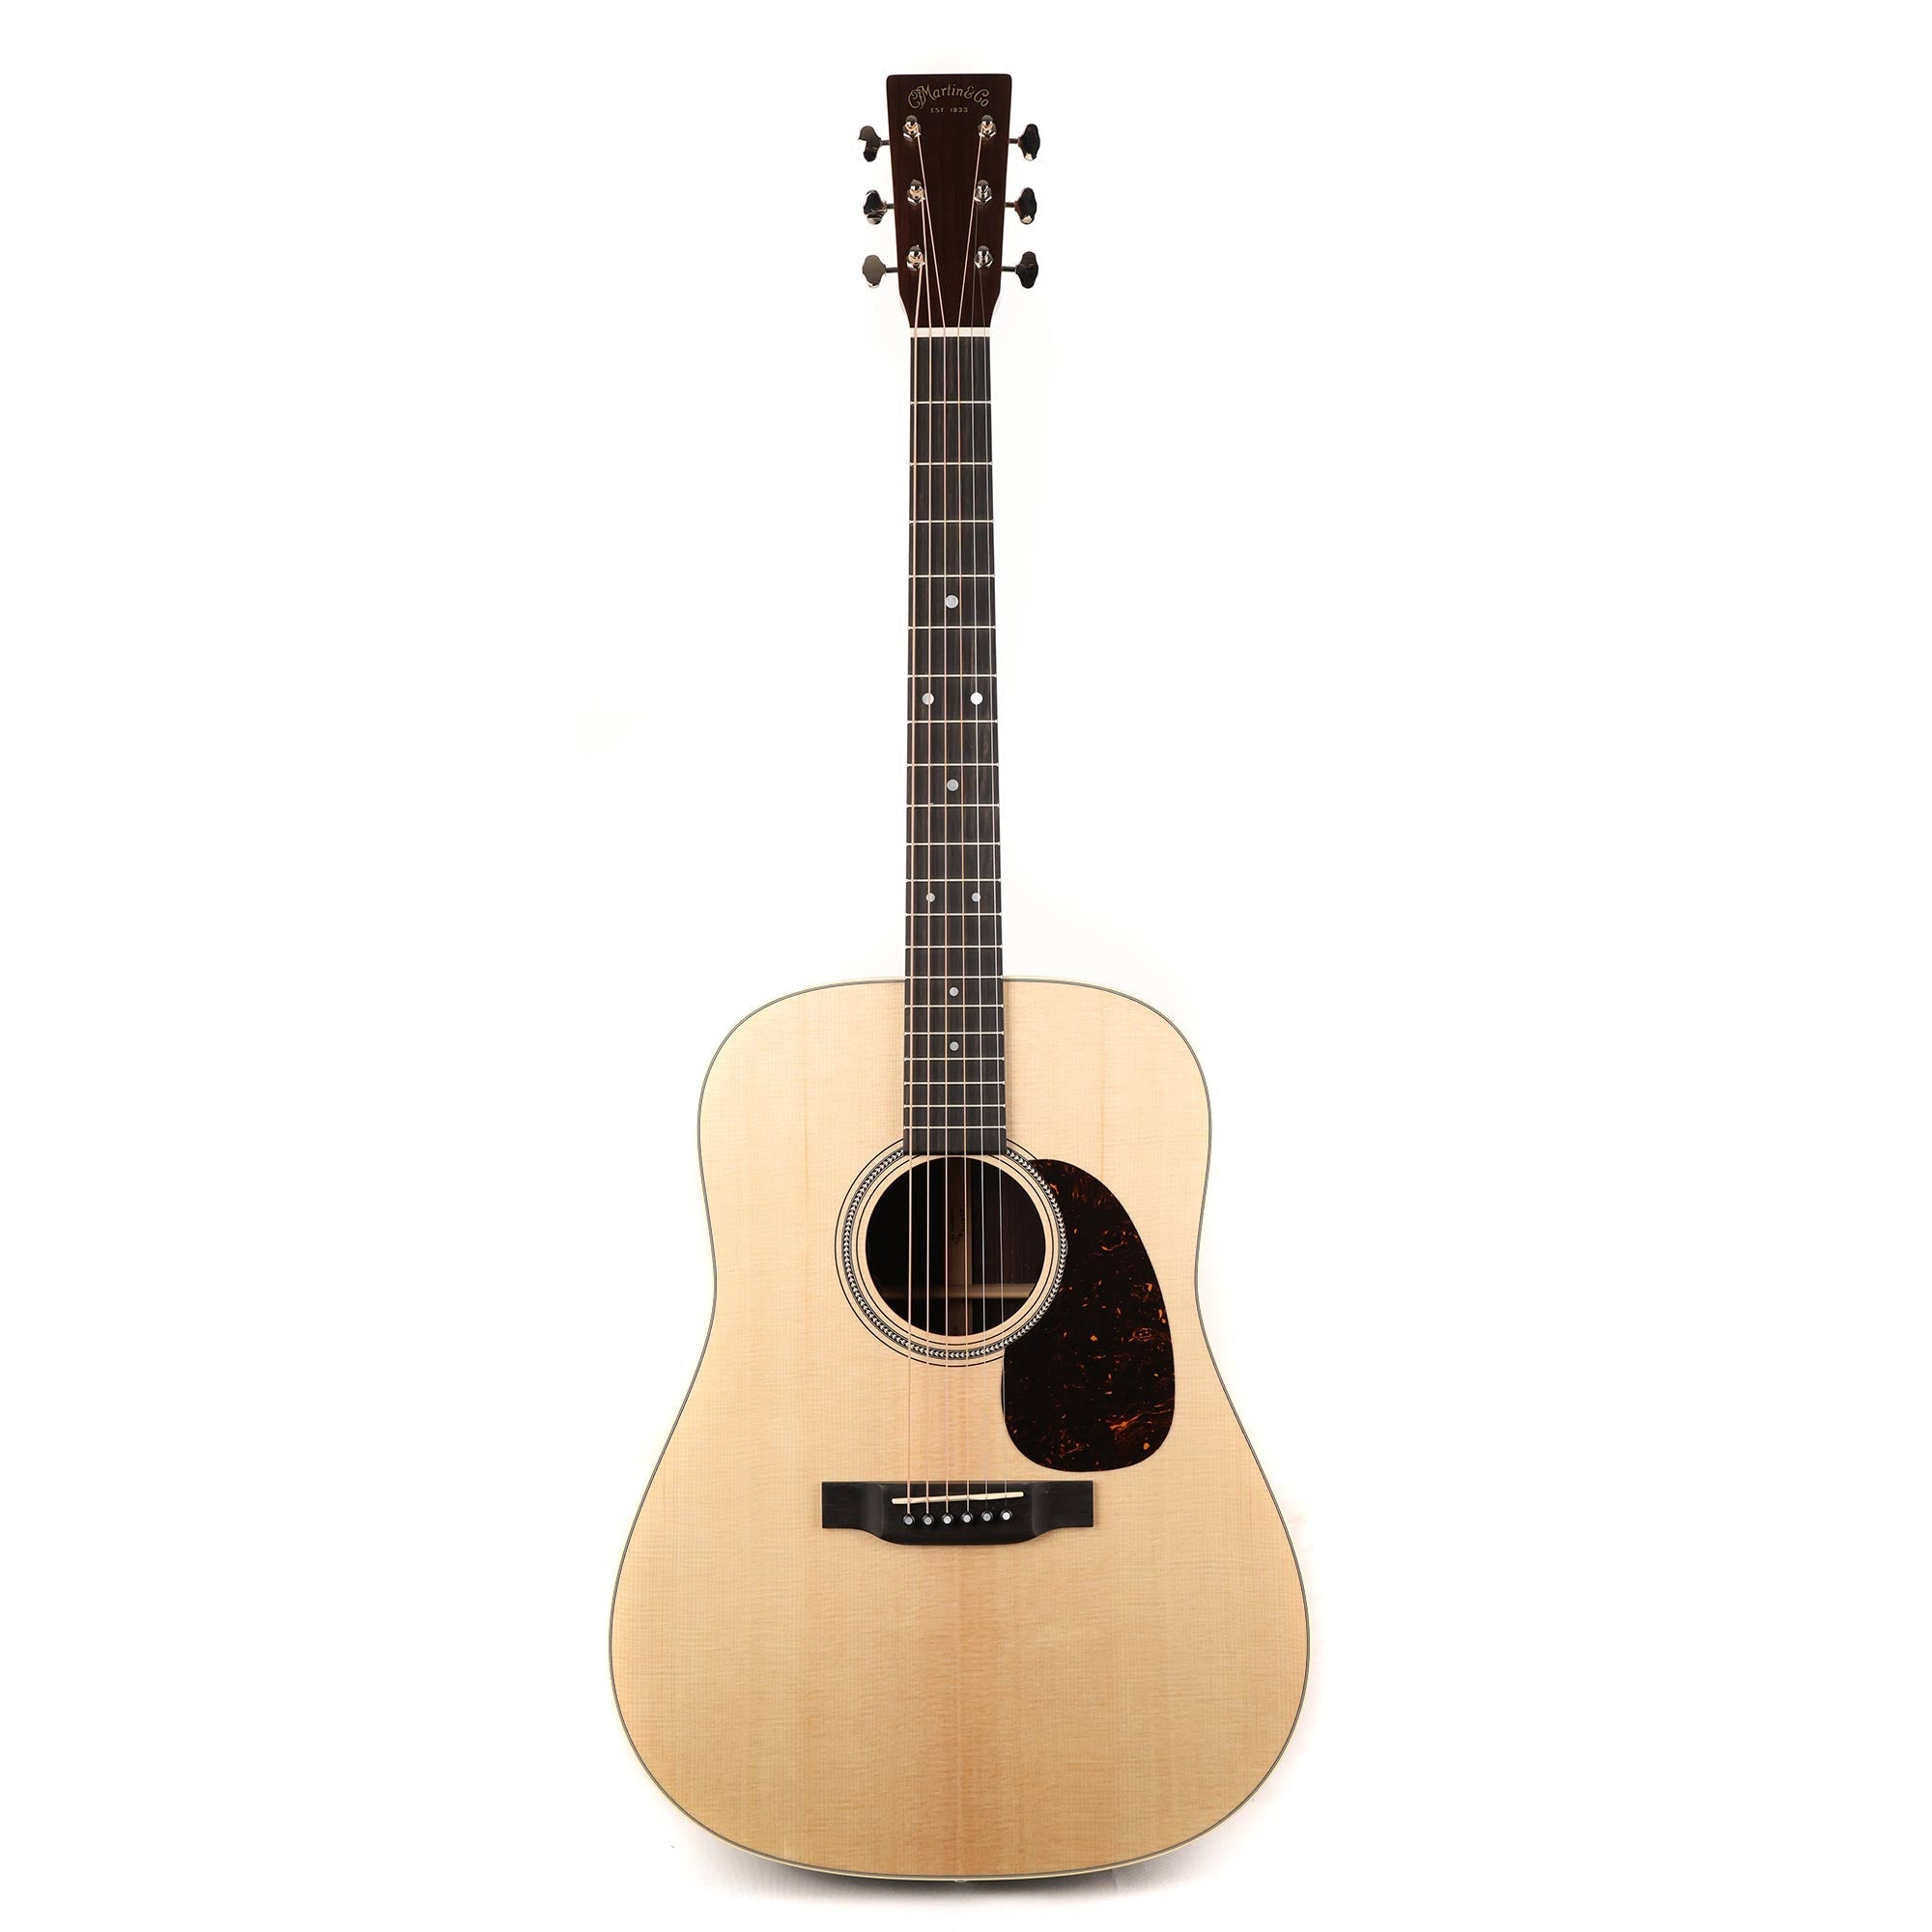 Martin D-16E Rosewood Dreadnought Acoustic-Electric